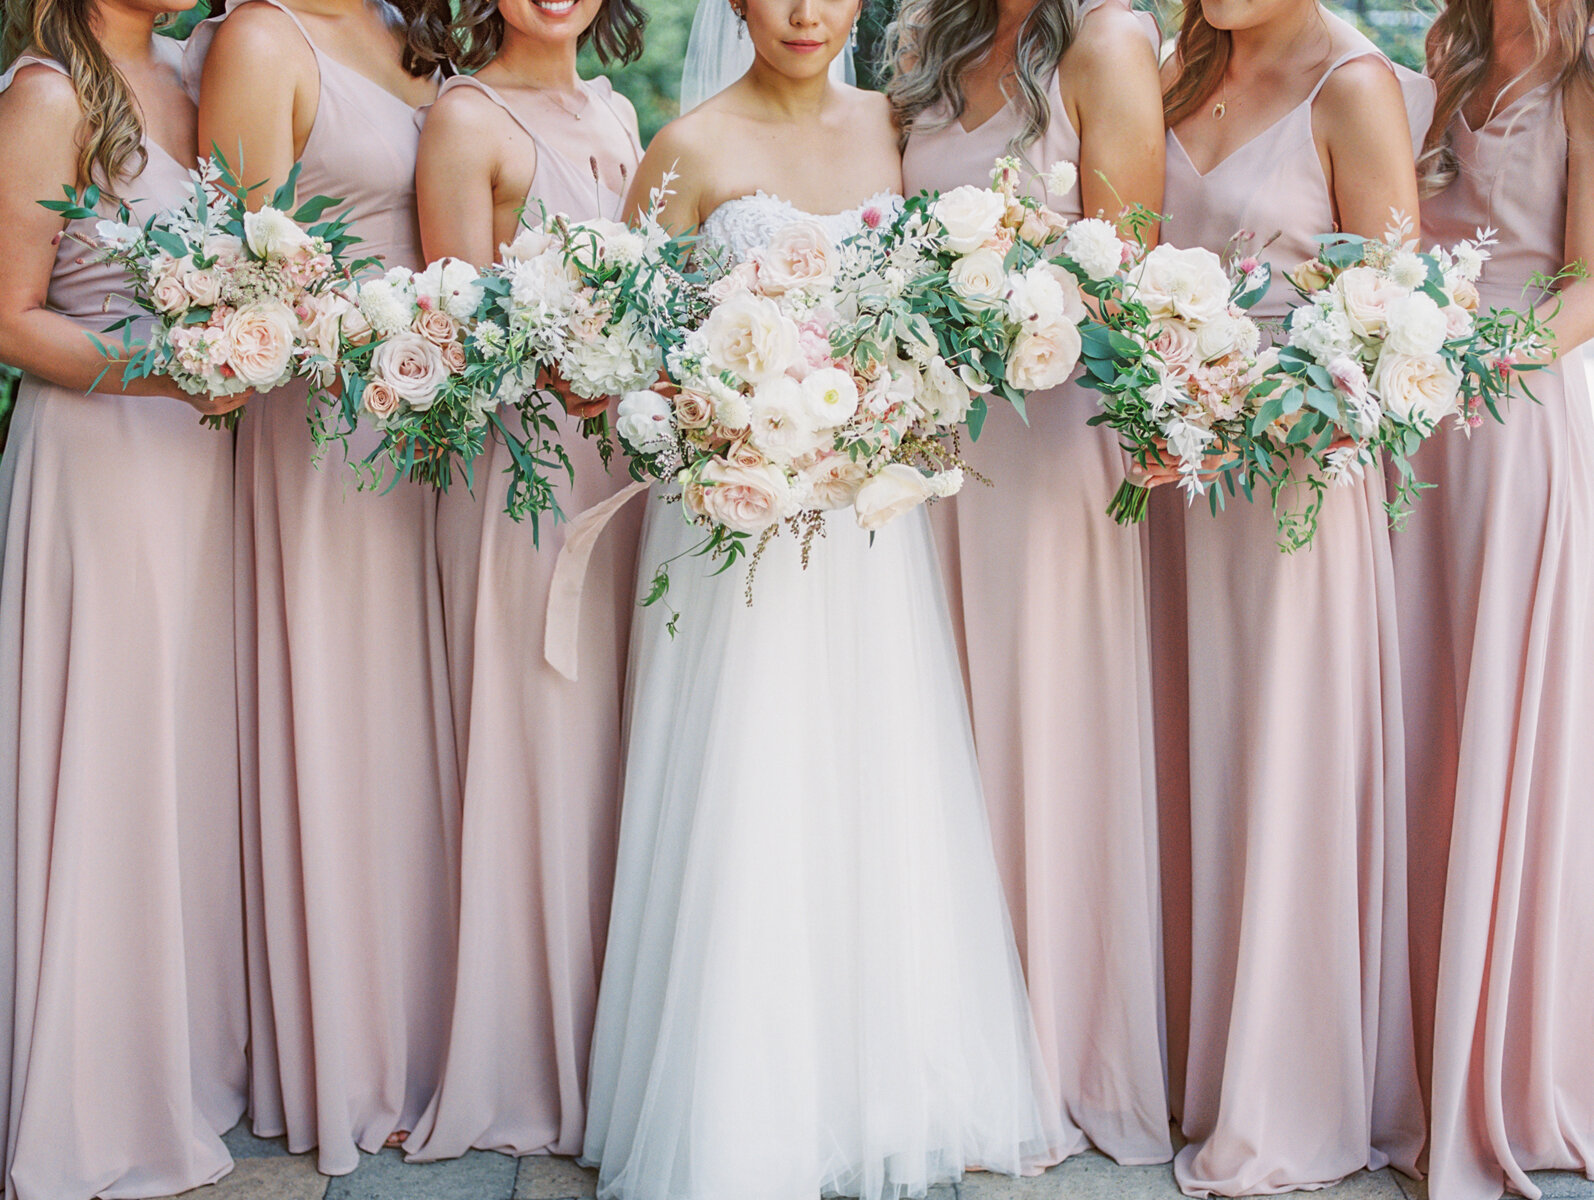 Bridesmaids in blush and dusty rose dresses